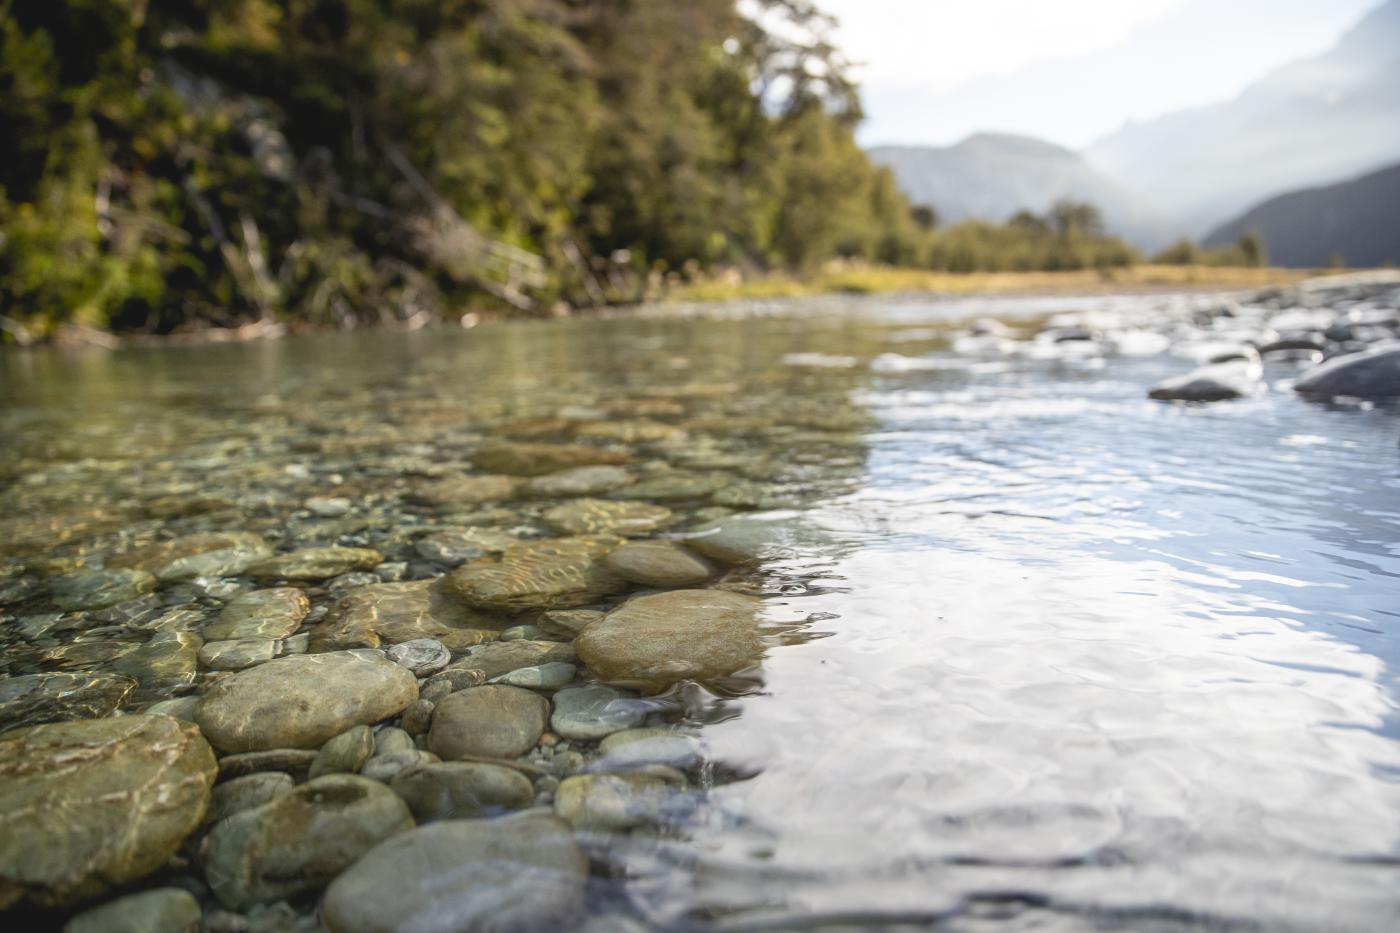 Close up of water and rocks - Dart River, Glenorchy